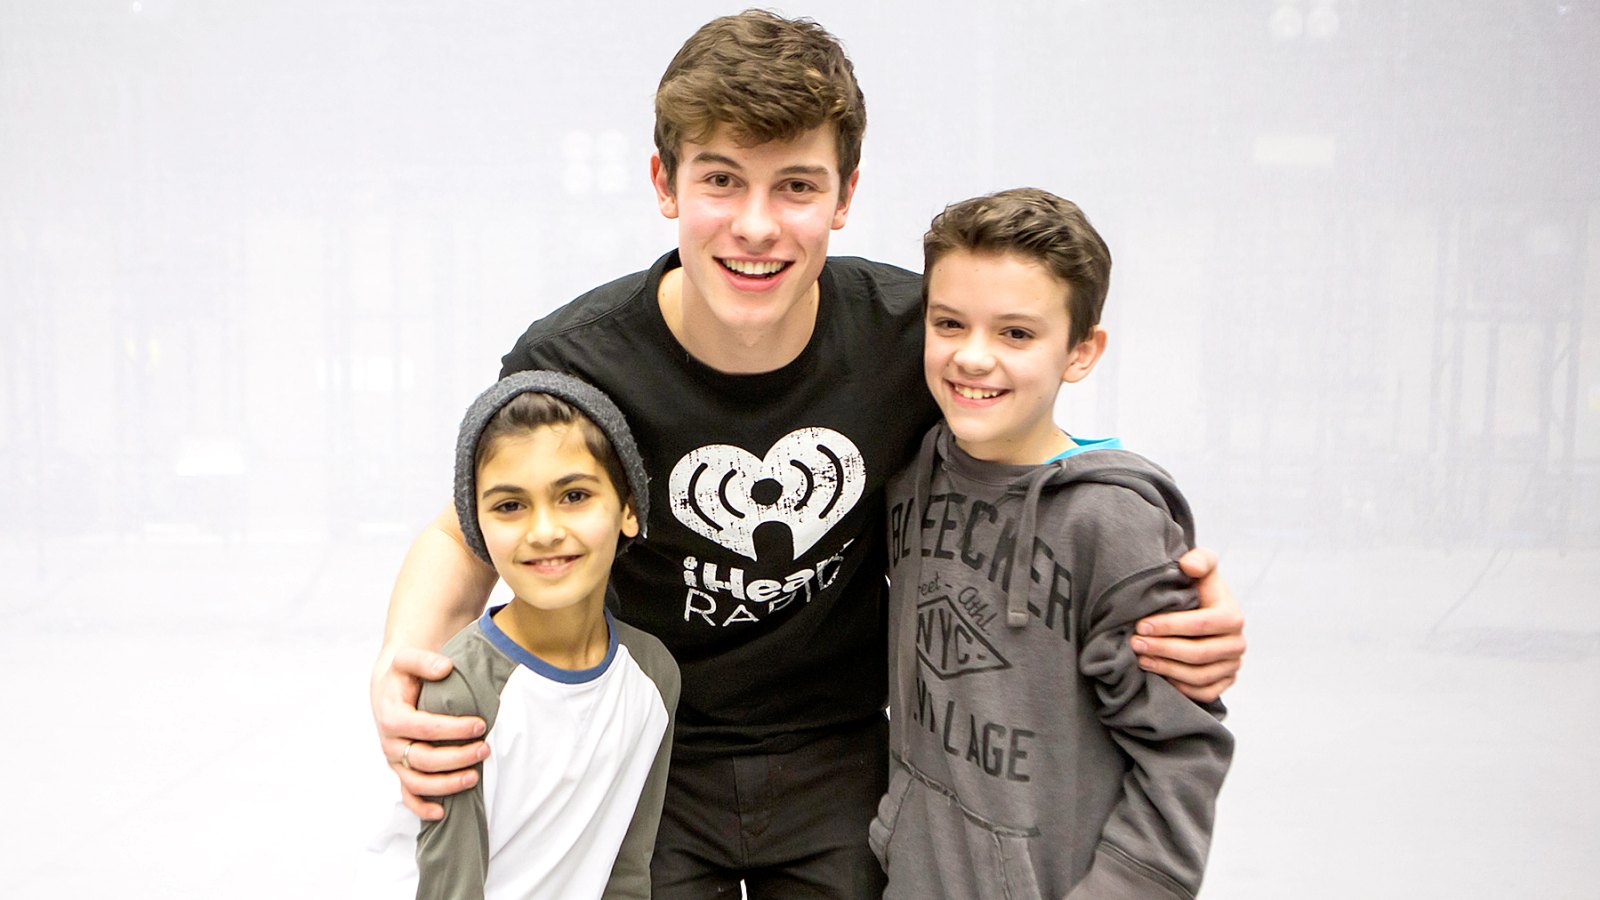 Shawn Mendes rehearsed with James Ciannello and Jordan Matalon ahead of the Garden of Dreams Talent Show.